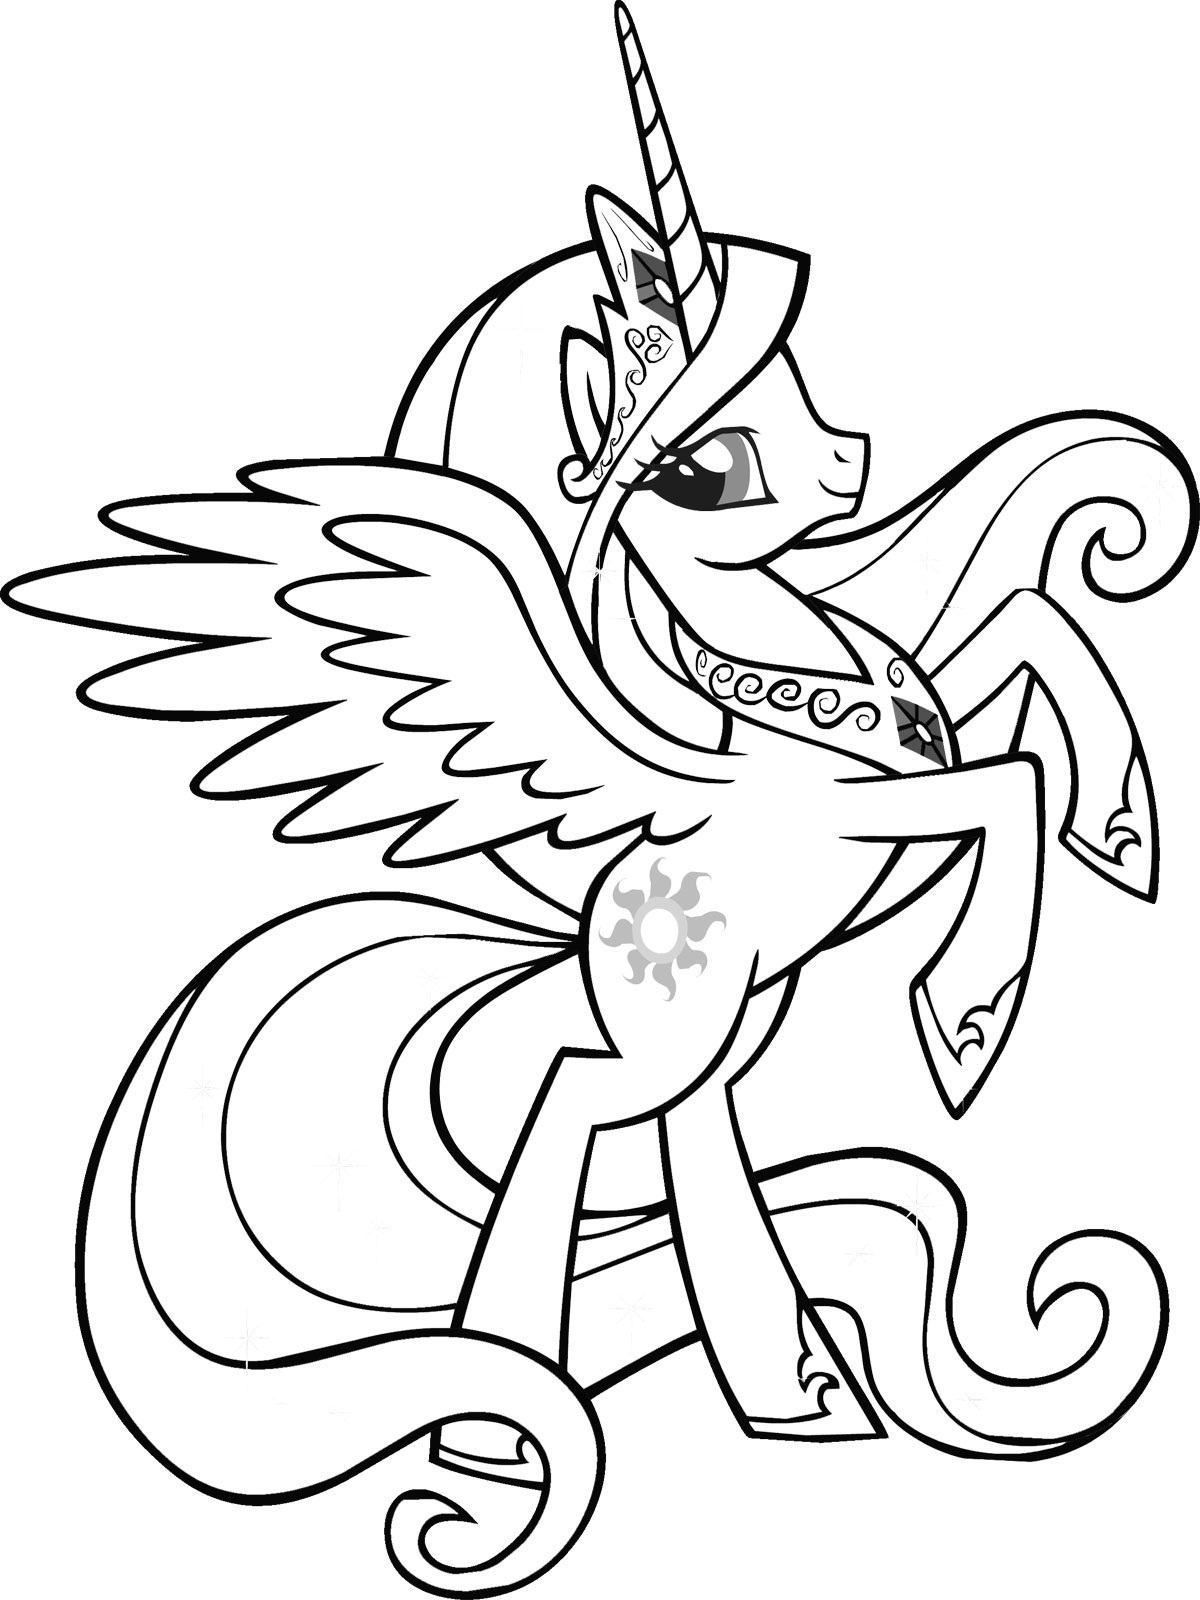 my little pony coloring pages pdf | Alphabet Coloring Pages